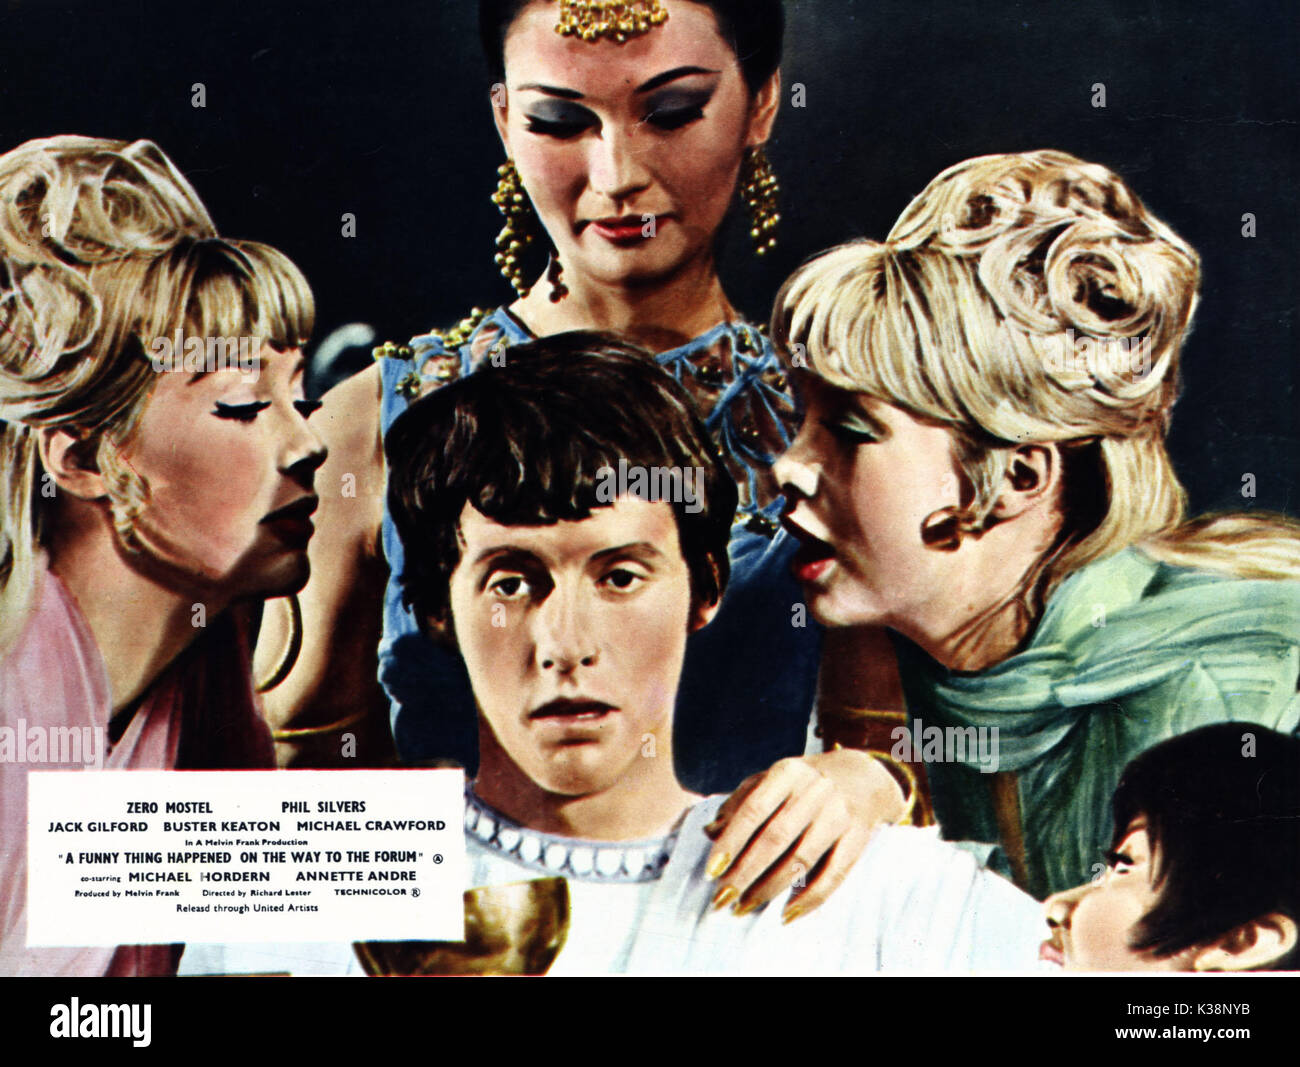 A FUNNY THING HAPPENED ON THE WAY TO THE FORUM MICHAEL CRAWFORD , JENNIFER OR SUSAN BAKER [either side], LUCIENNE BRIDOU [behind], HELEN FUNAI [bottom right]     Date: 1966 Stock Photo